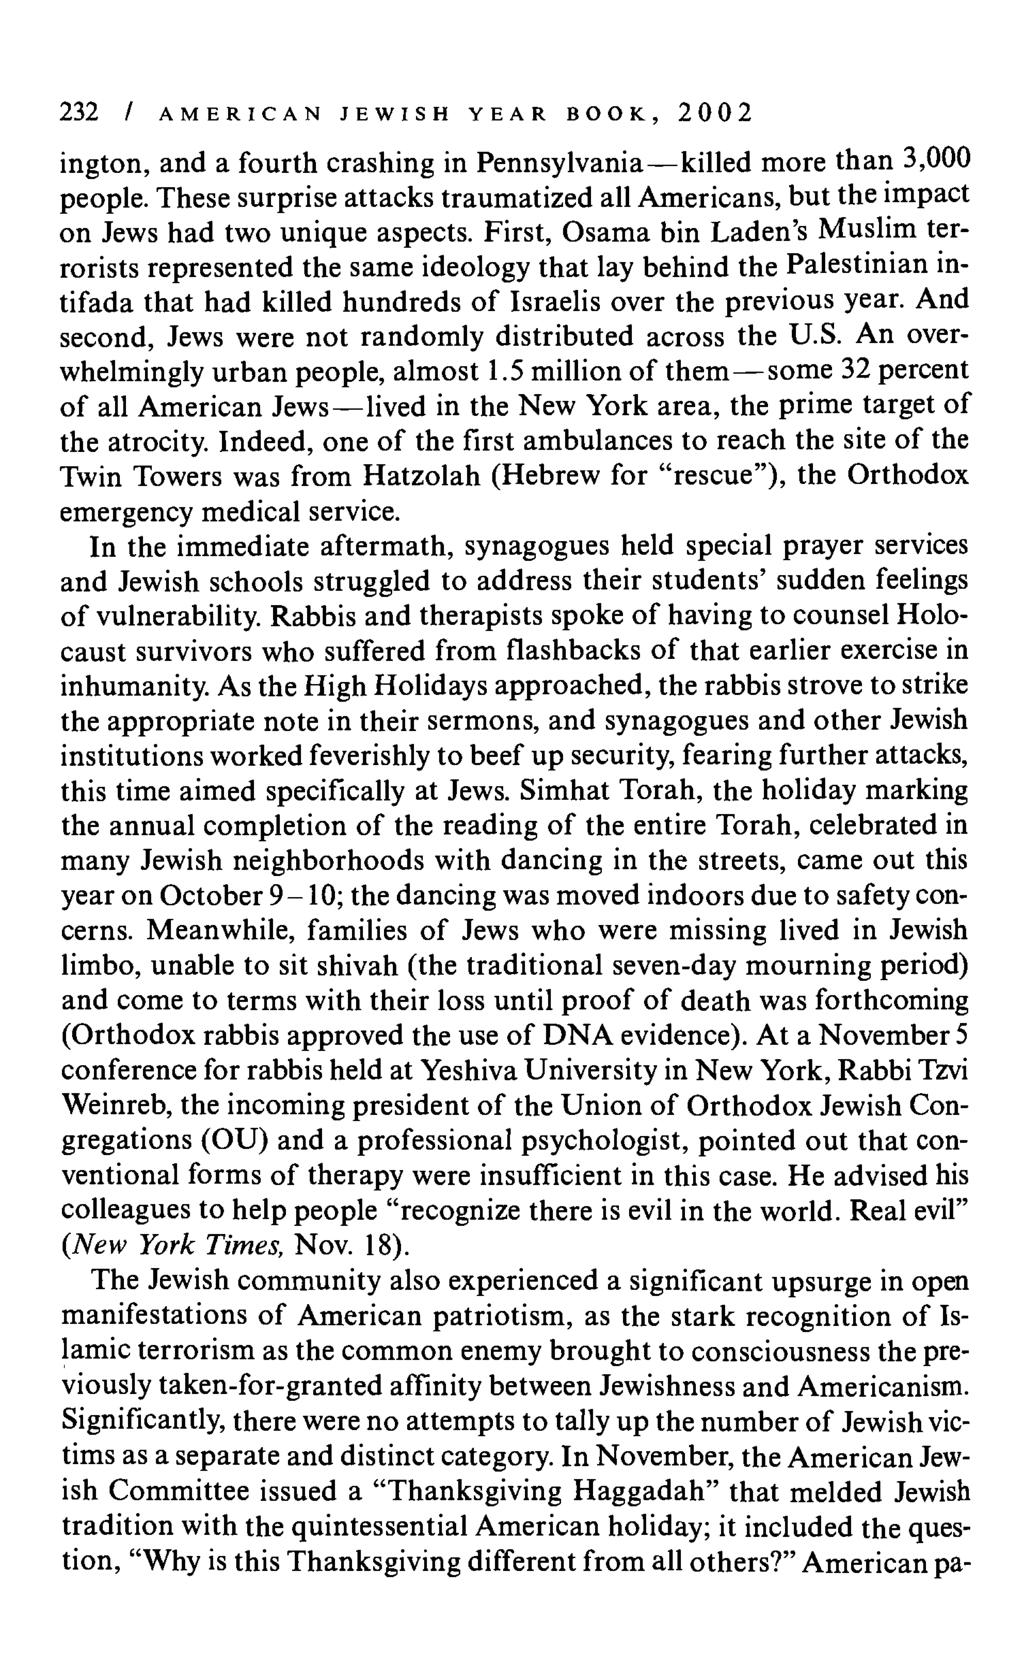 232 / AMERICAN JEWISH YEAR BOOK, 2002 ington, and a fourth crashing in Pennsylvania killed more than 3,000 people.